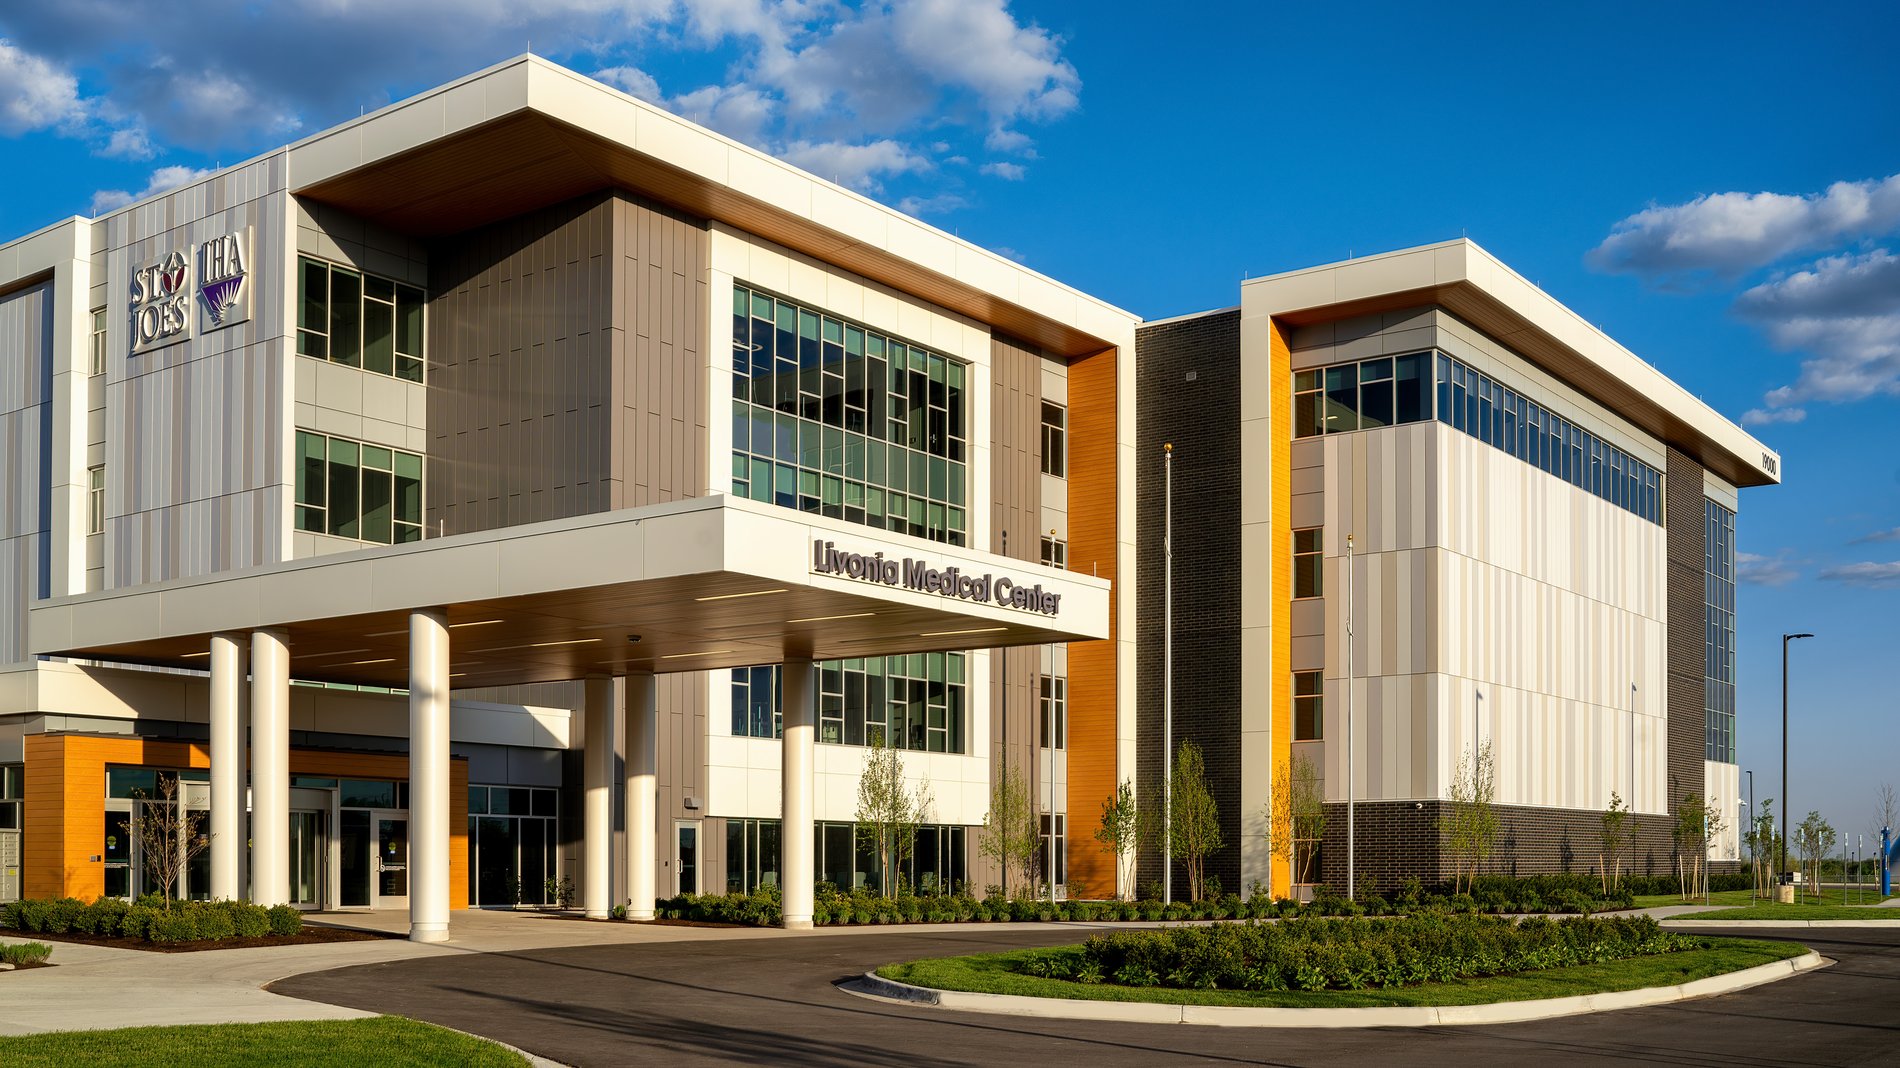 IHA Orthopaedics Livonia is located in the Livonia Medical Center on the campus of Schoolcraft College.